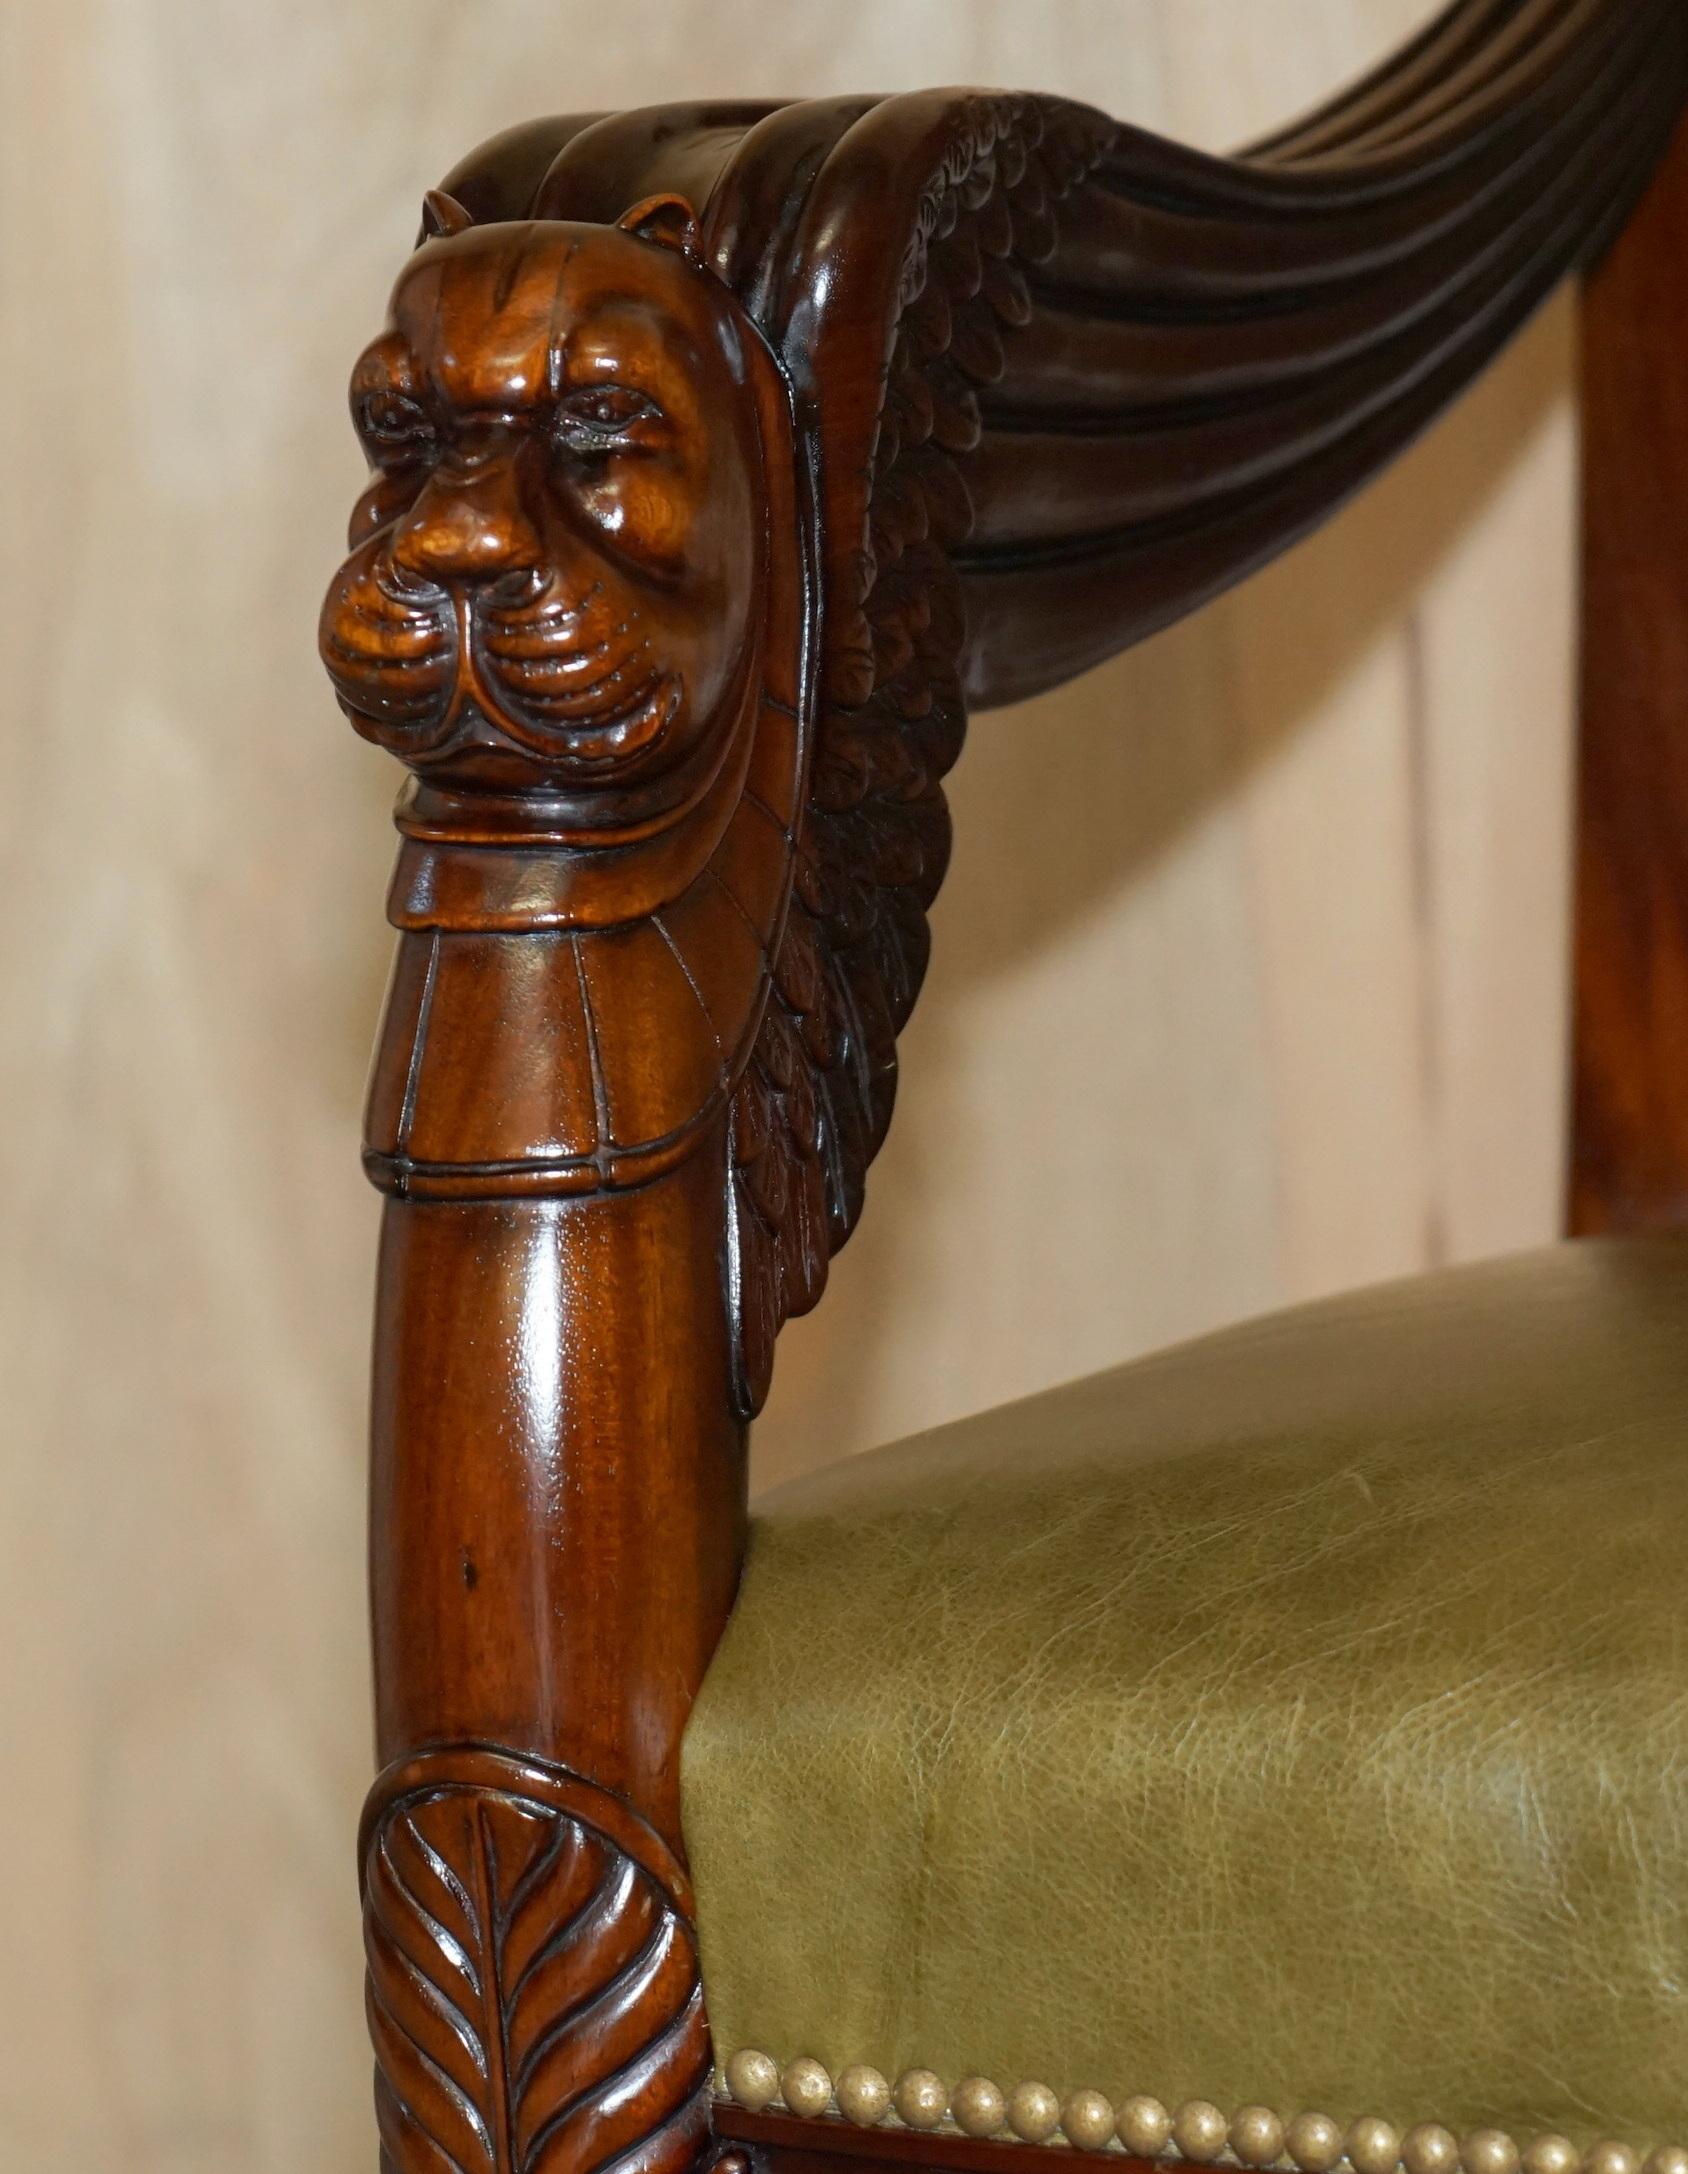 EXQUISITE PAIR OF HAND CARved HARDWOOD LiBRARY ARMCHAIRS LION GRIFFON WING ARMS im Angebot 2